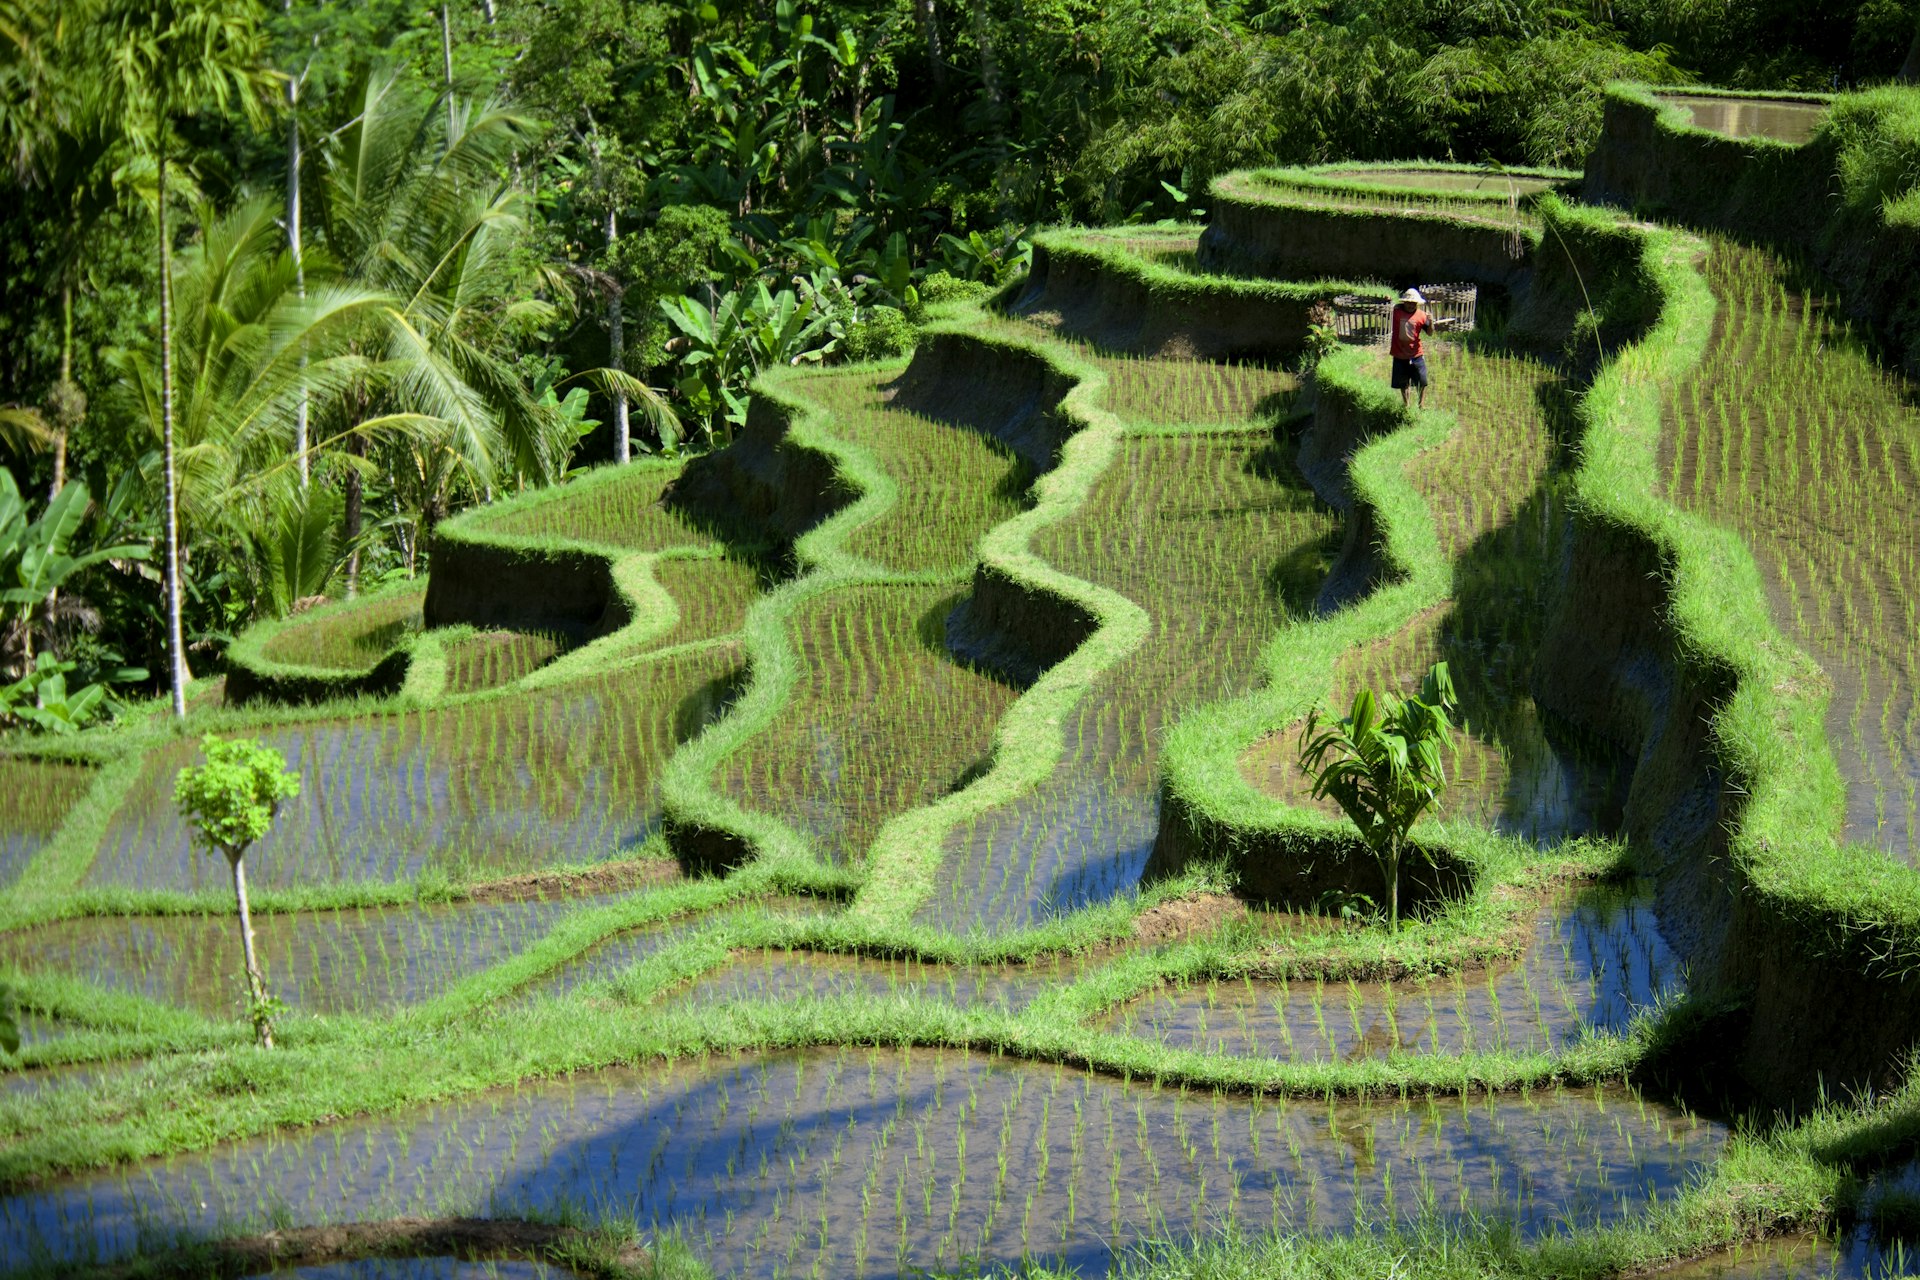 Overview of flooded rice terraces near Ubud